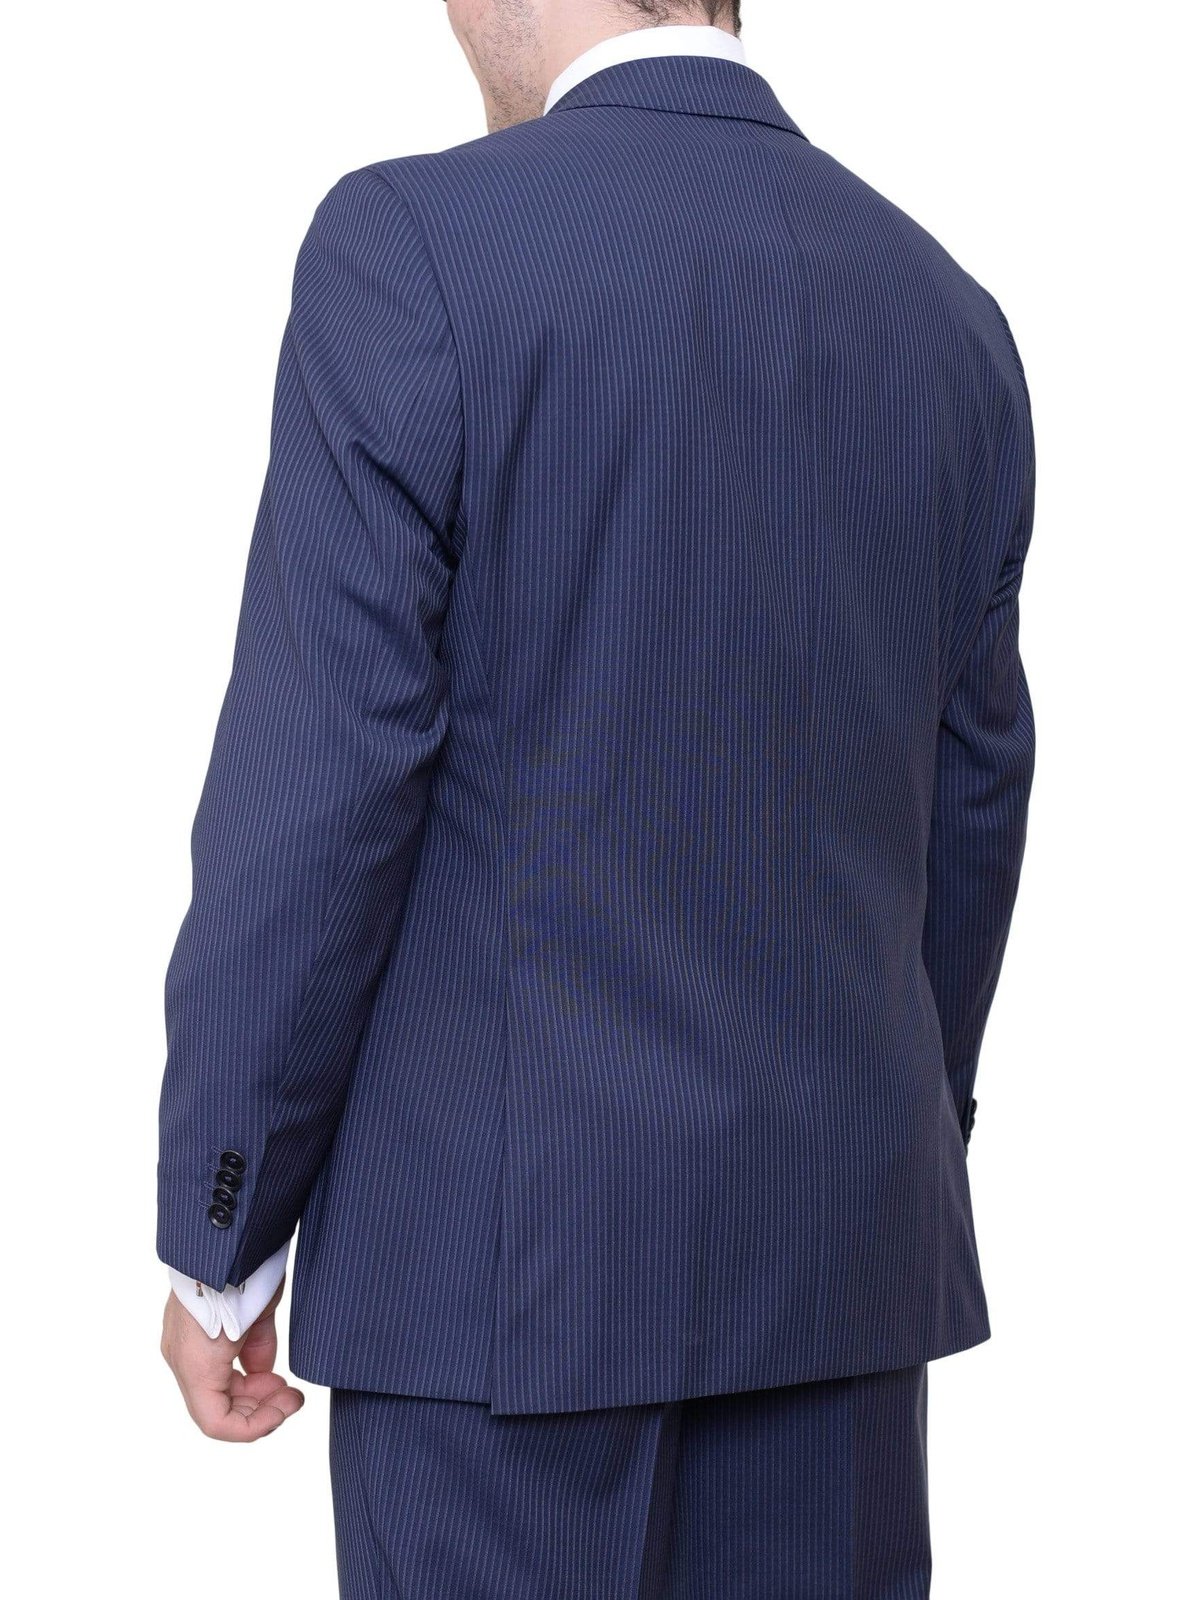 HUGO BOSS TWO PIECE SUITS Hugo Boss Edison/power Classic Fit Navy Blue Pinstriped Two Button Wool Suit